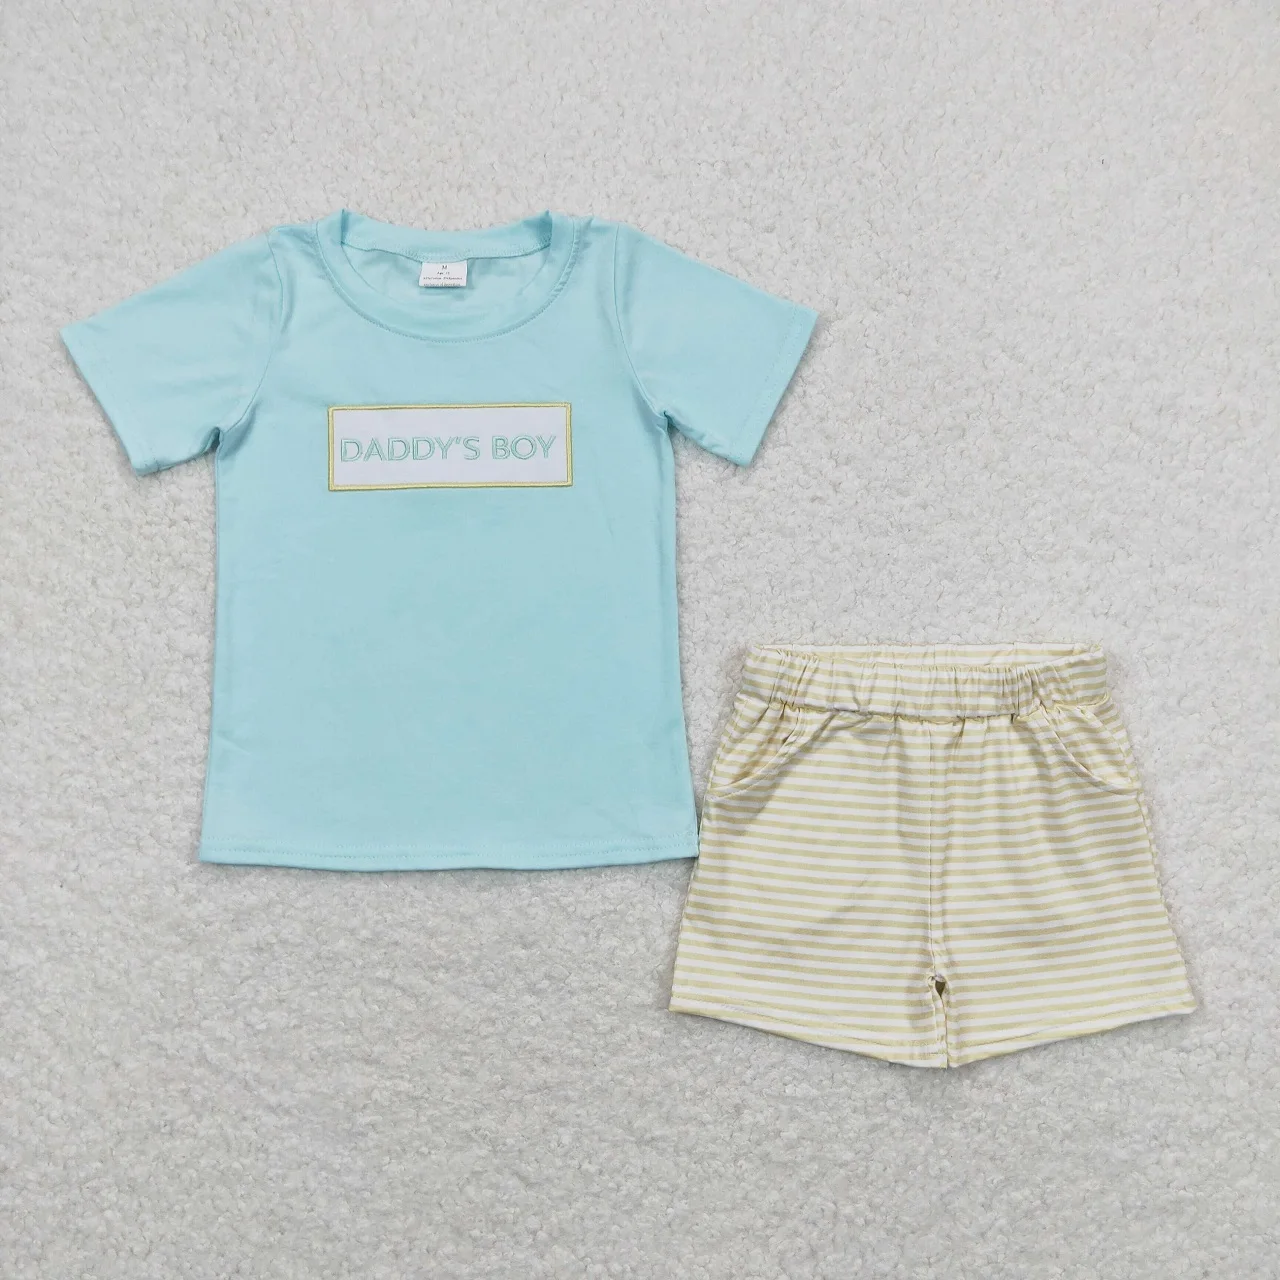 

Wholesale Children Embroidery Summer Sets Toddler Short Sleeves Cotton Daddy's Boy T-shirts Kids Stripes Pocket Shorts Outfit